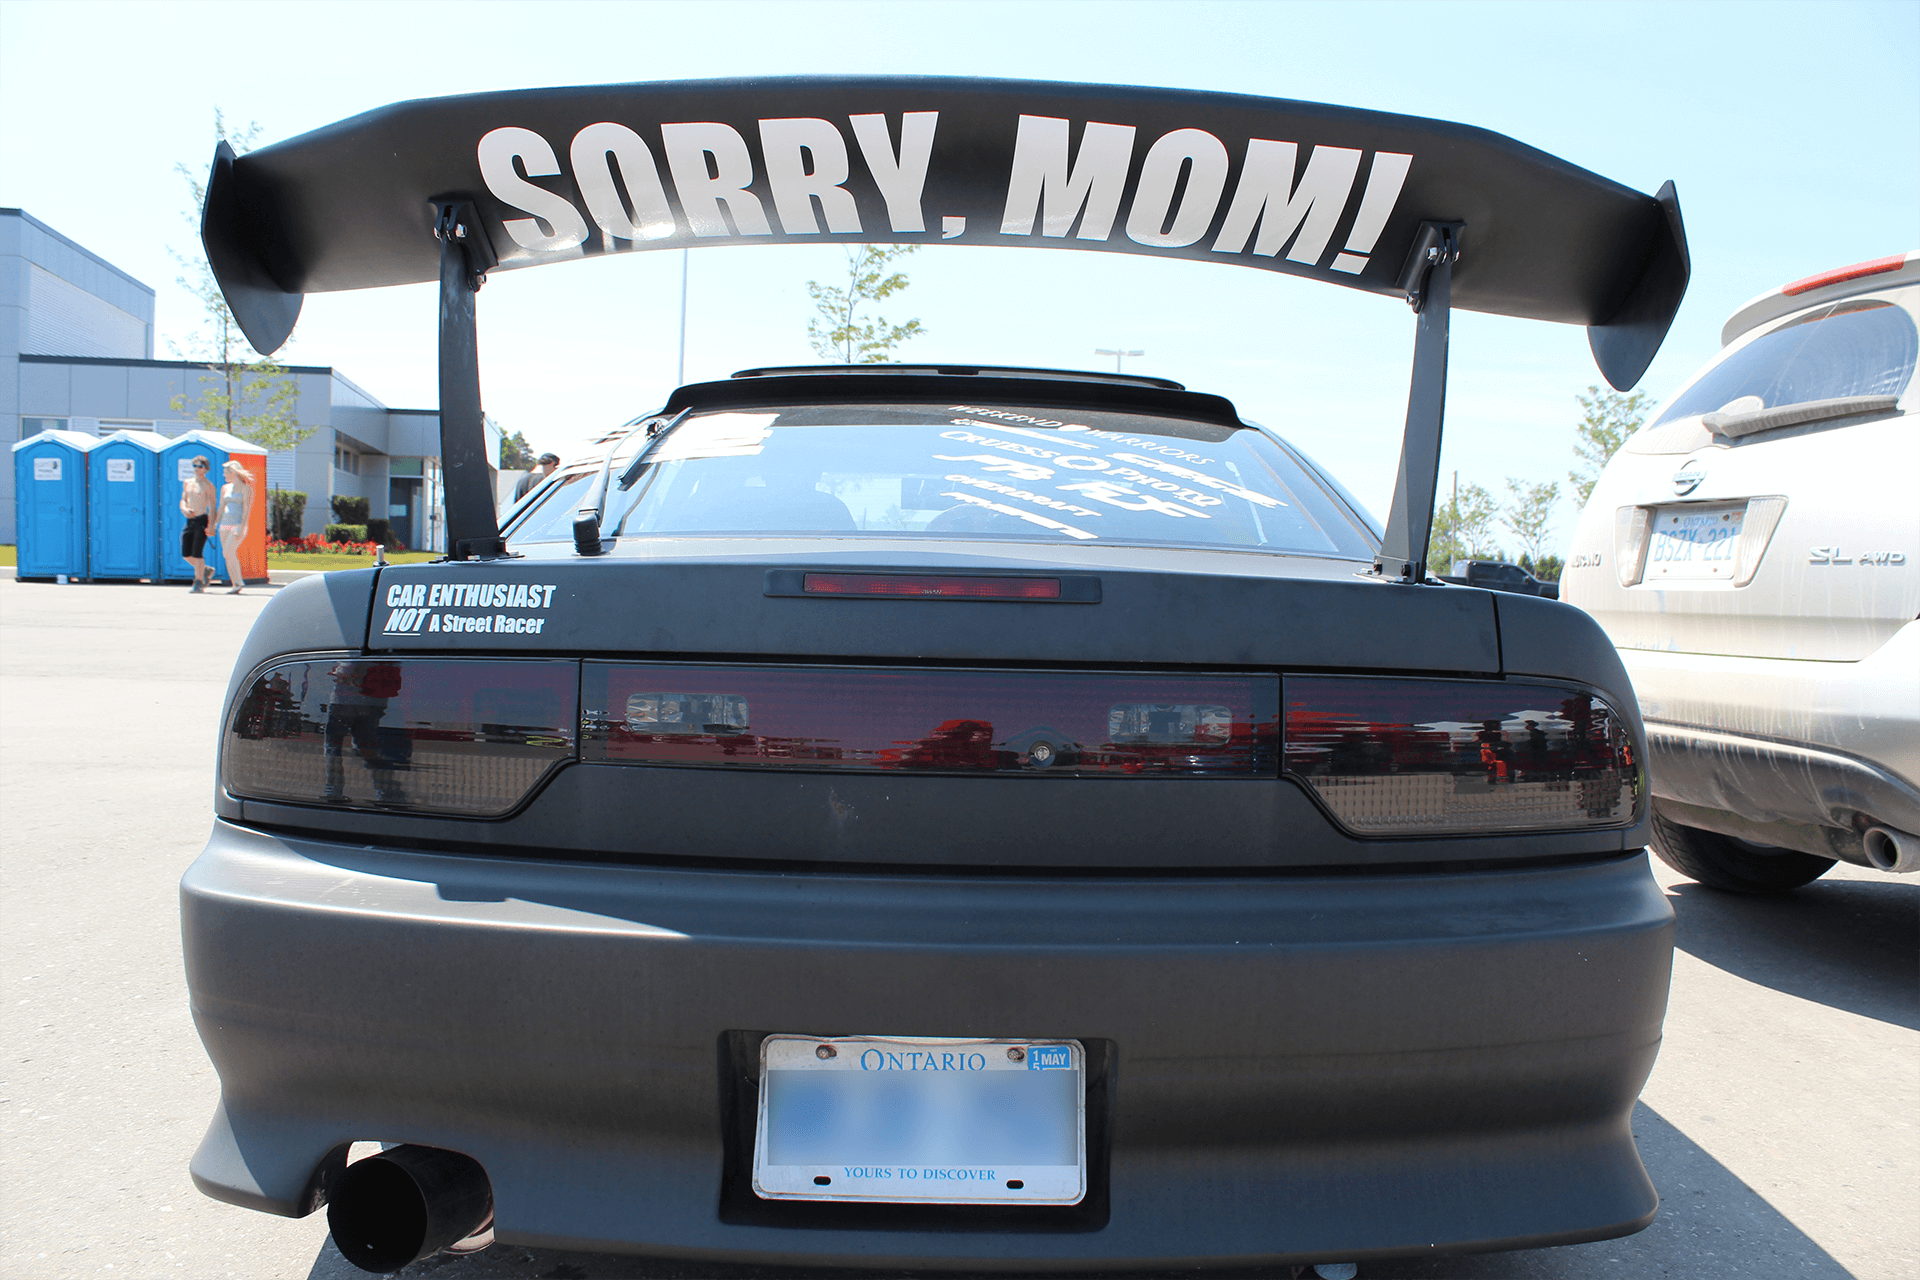 A photograph of a street race car with a spoiler that has the words "Sorry Mom!" printed on it. Removing after-market upgrades is one way to get more money for your car.